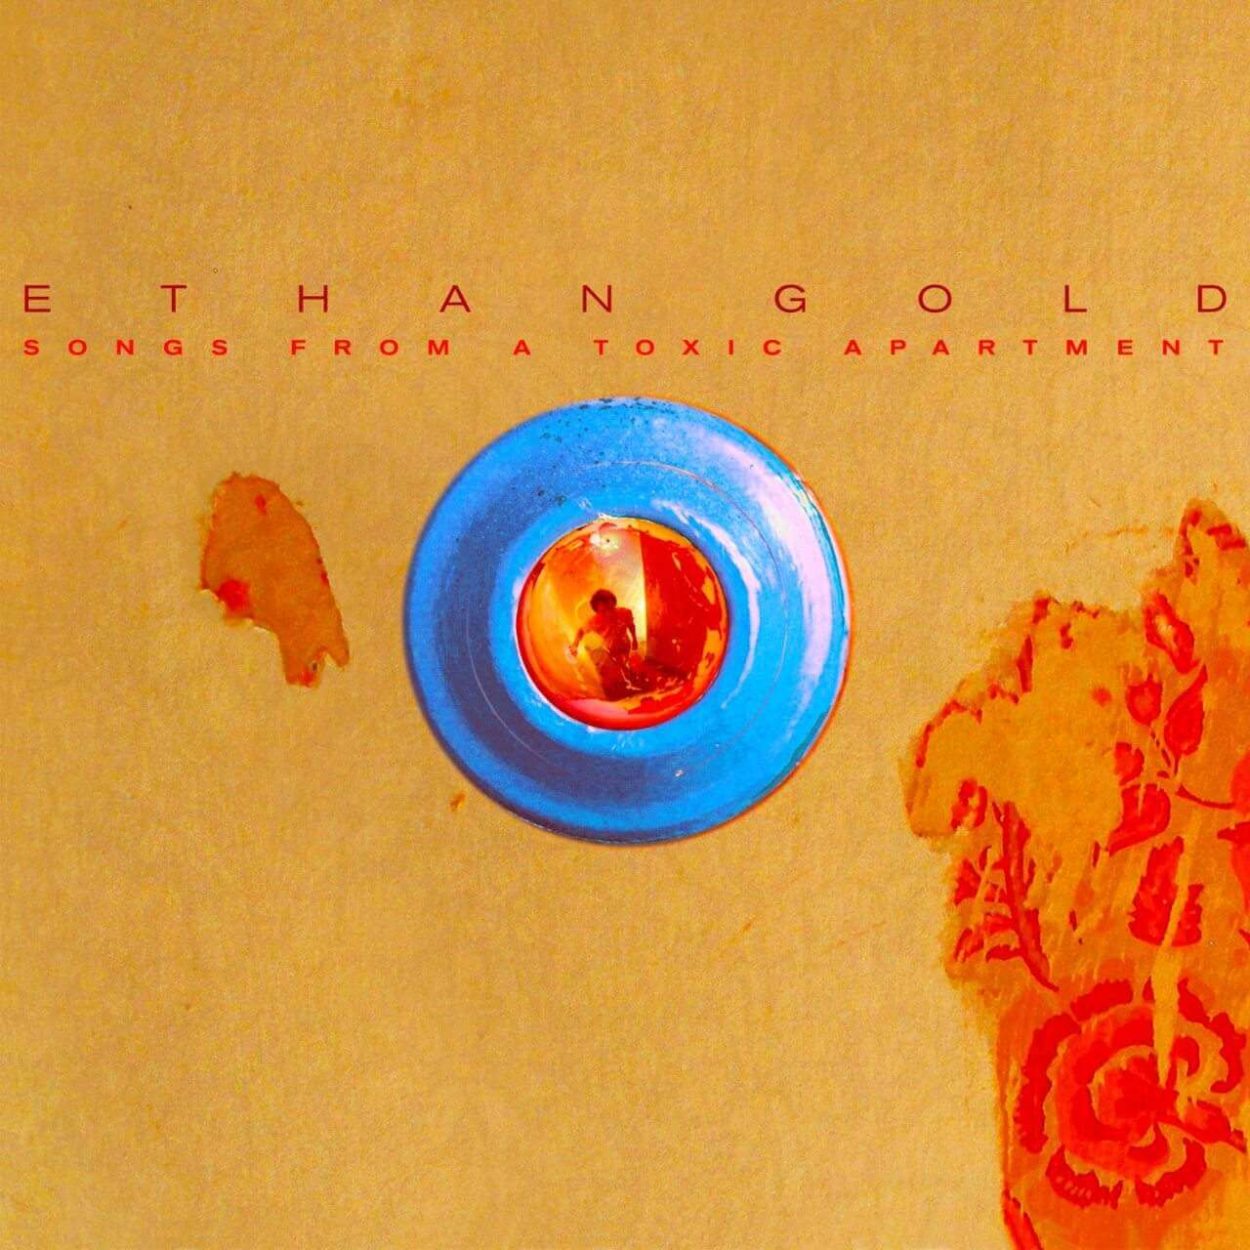 Ethan-Gold-Songs-from-a-Toxic-Apartment-cover-hisat-recentered-thumbnail4